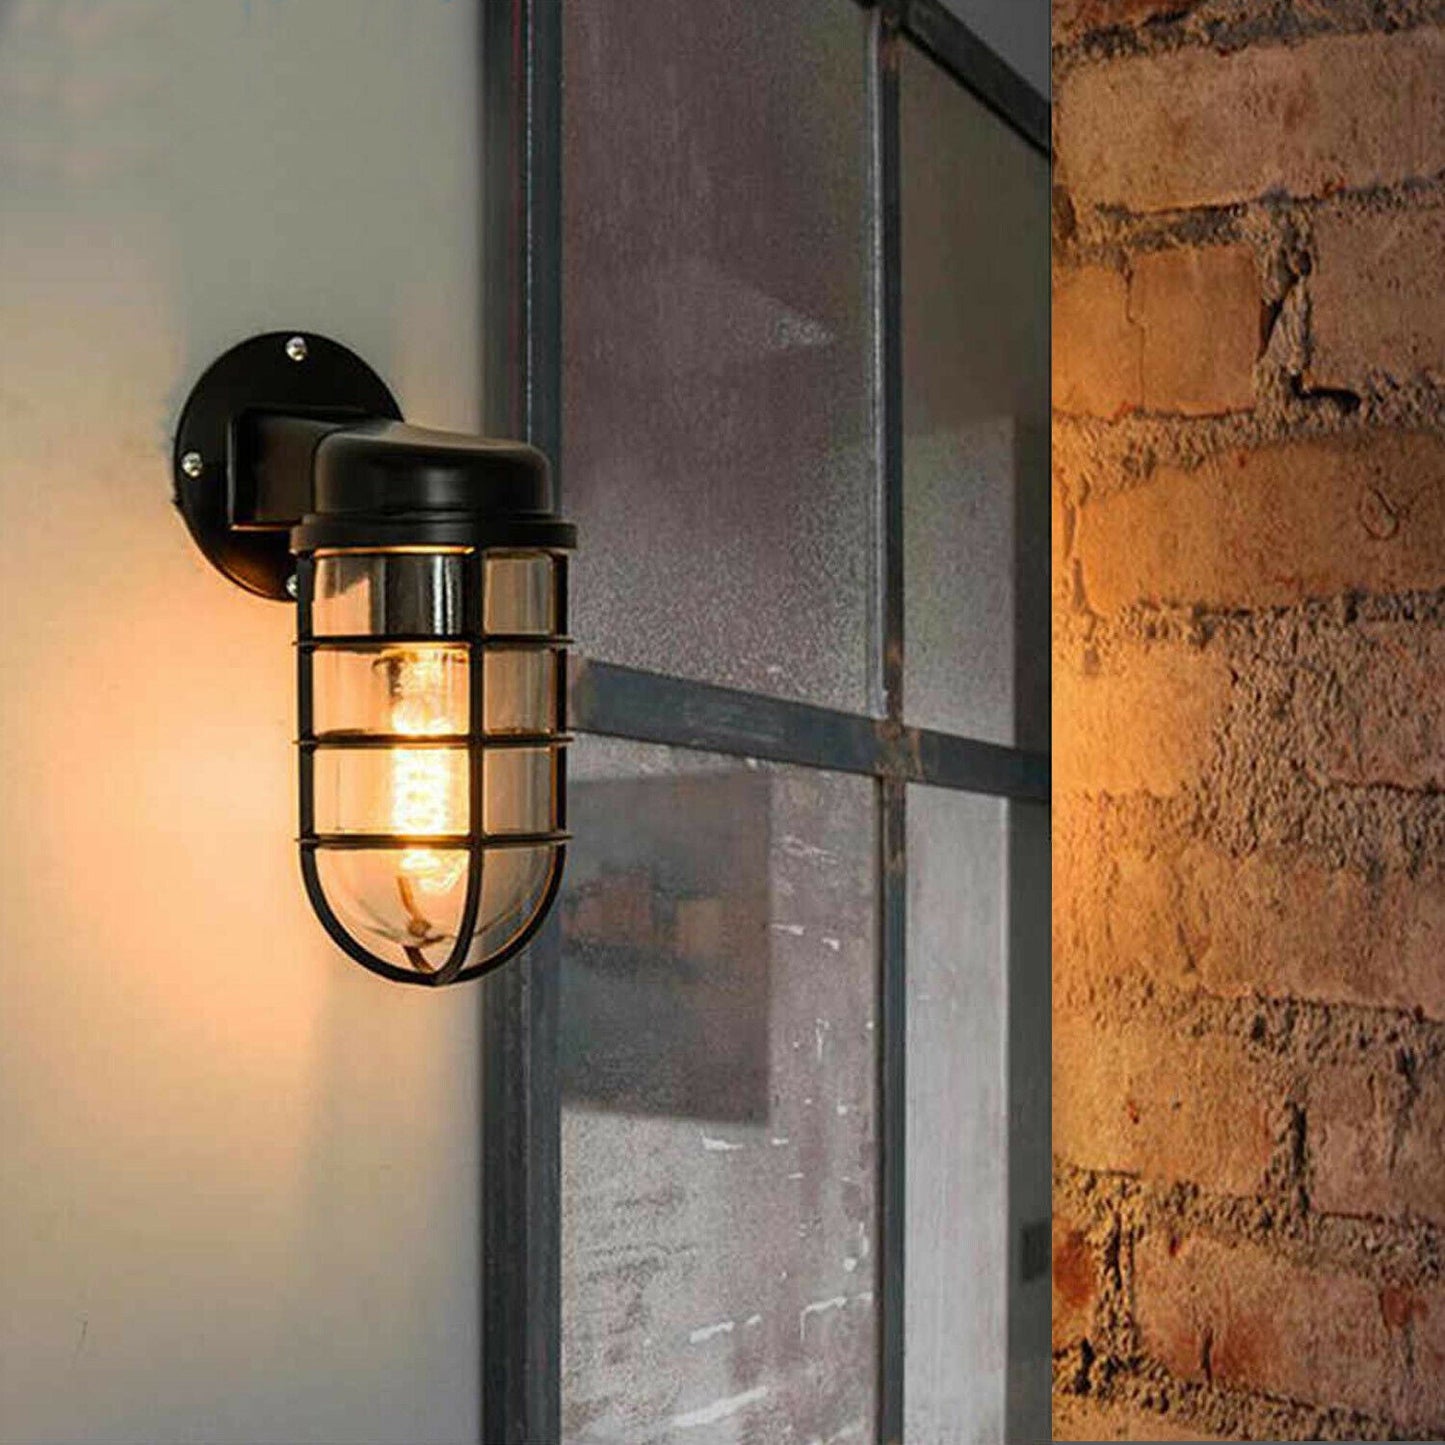 Set of Vintage Industrial Iron Wall Sconces - Cage Design for Home Decor-Application image